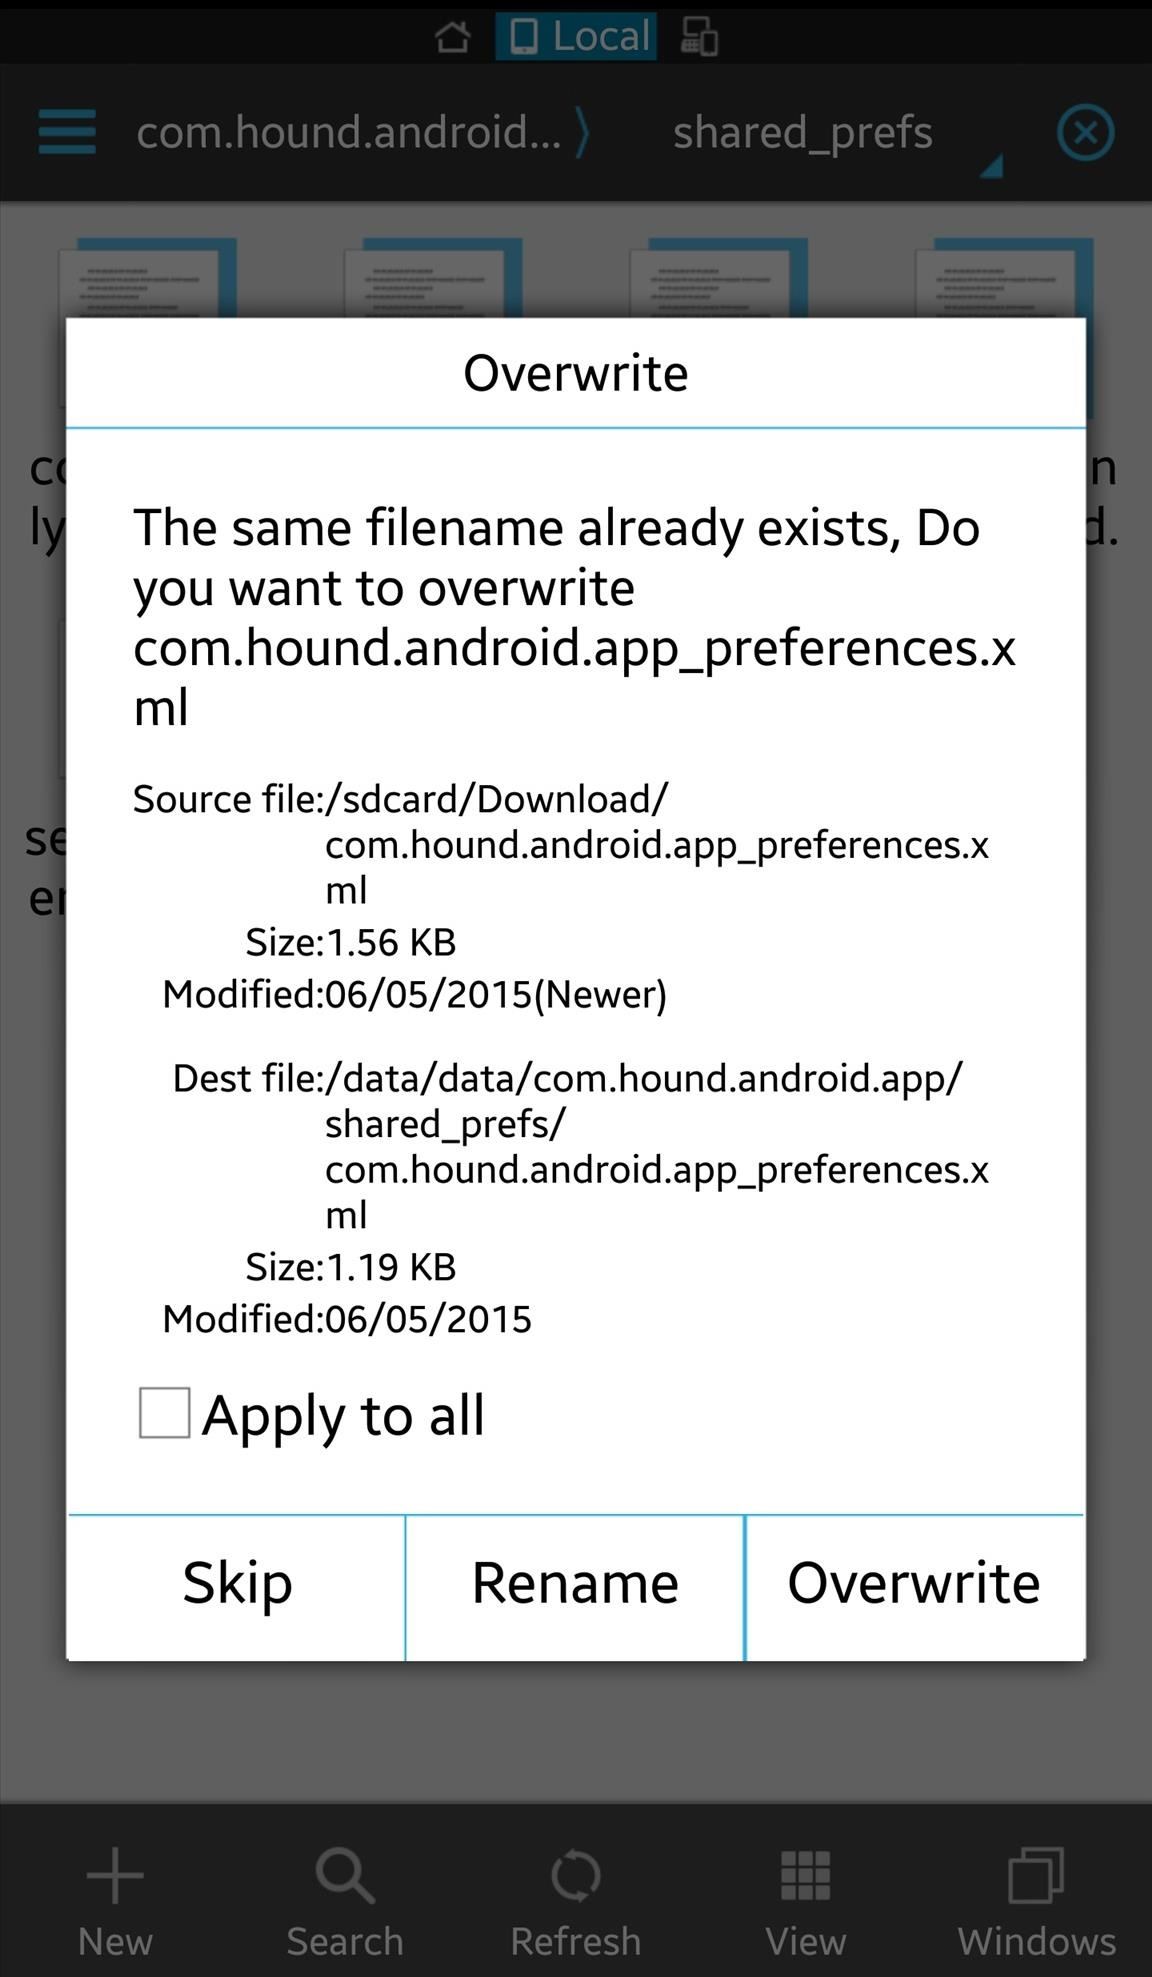 How to Use Hound on Android Without an Activation Code